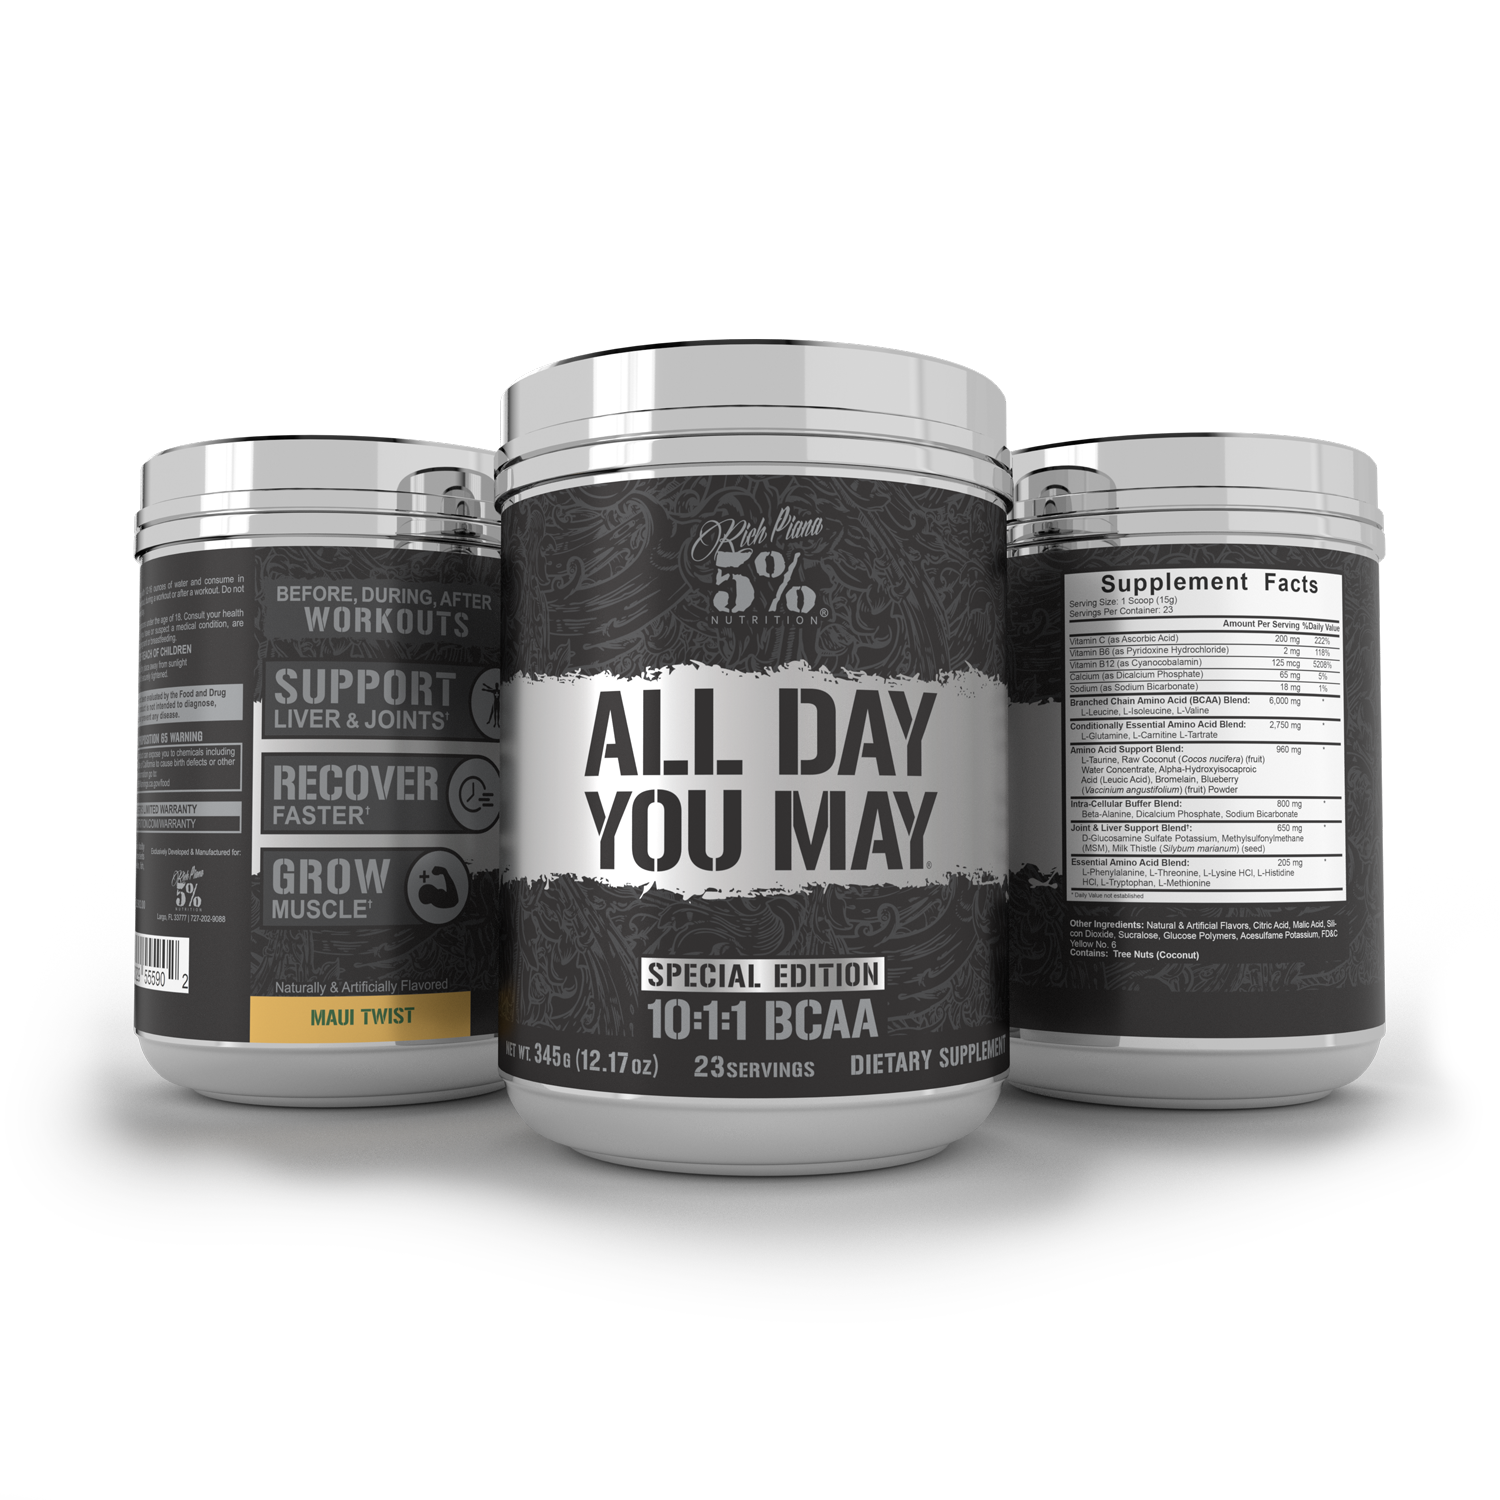 All Day You May BCAA Recovery Drink: Maui Twist - 5% Nutrition